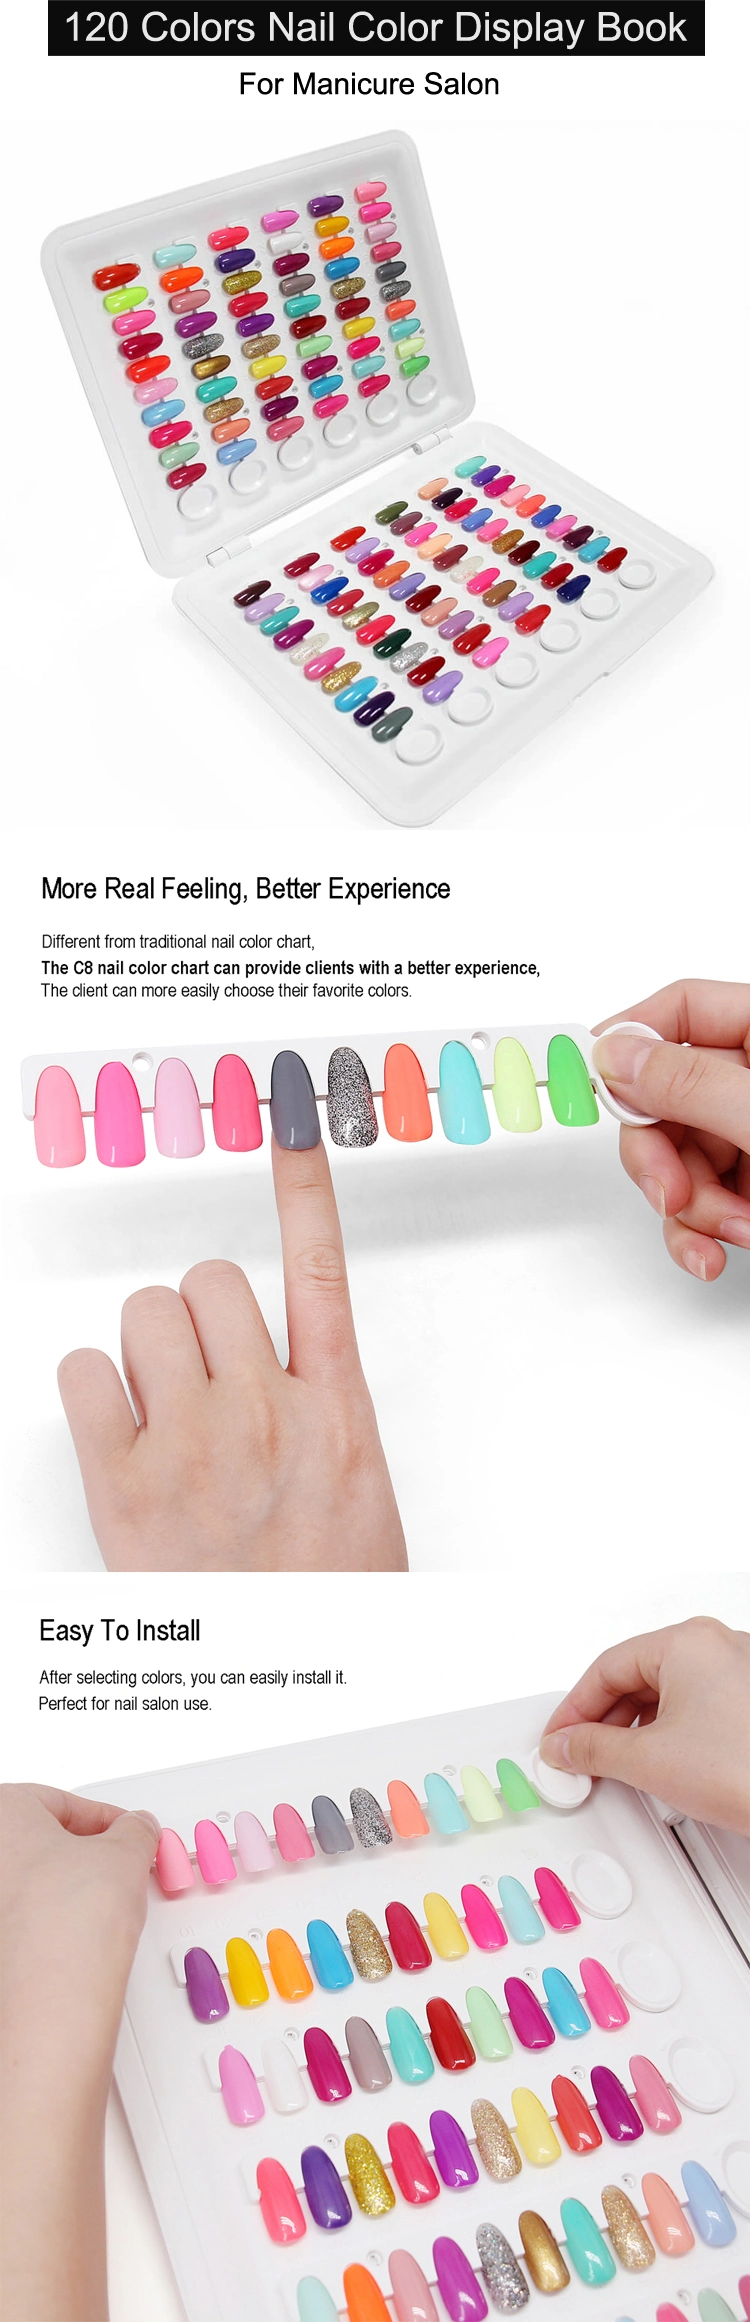 Magnetic Closure Design 120 Colors Gel Polish Nail Color Chart Display Book for Manicure Showing